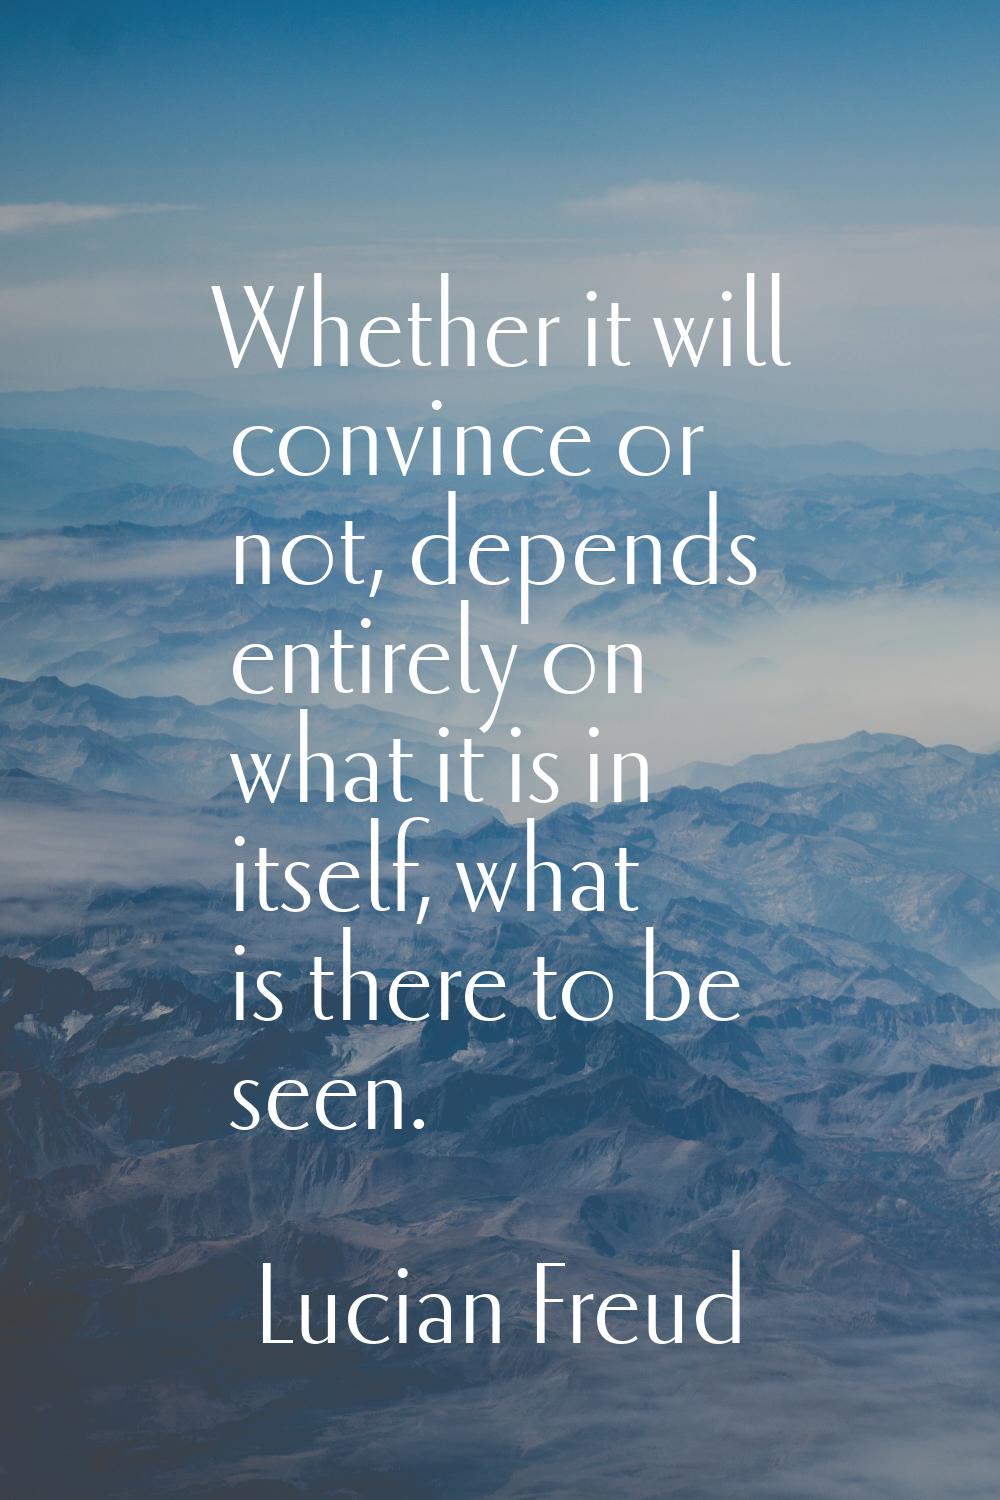 Whether it will convince or not, depends entirely on what it is in itself, what is there to be seen